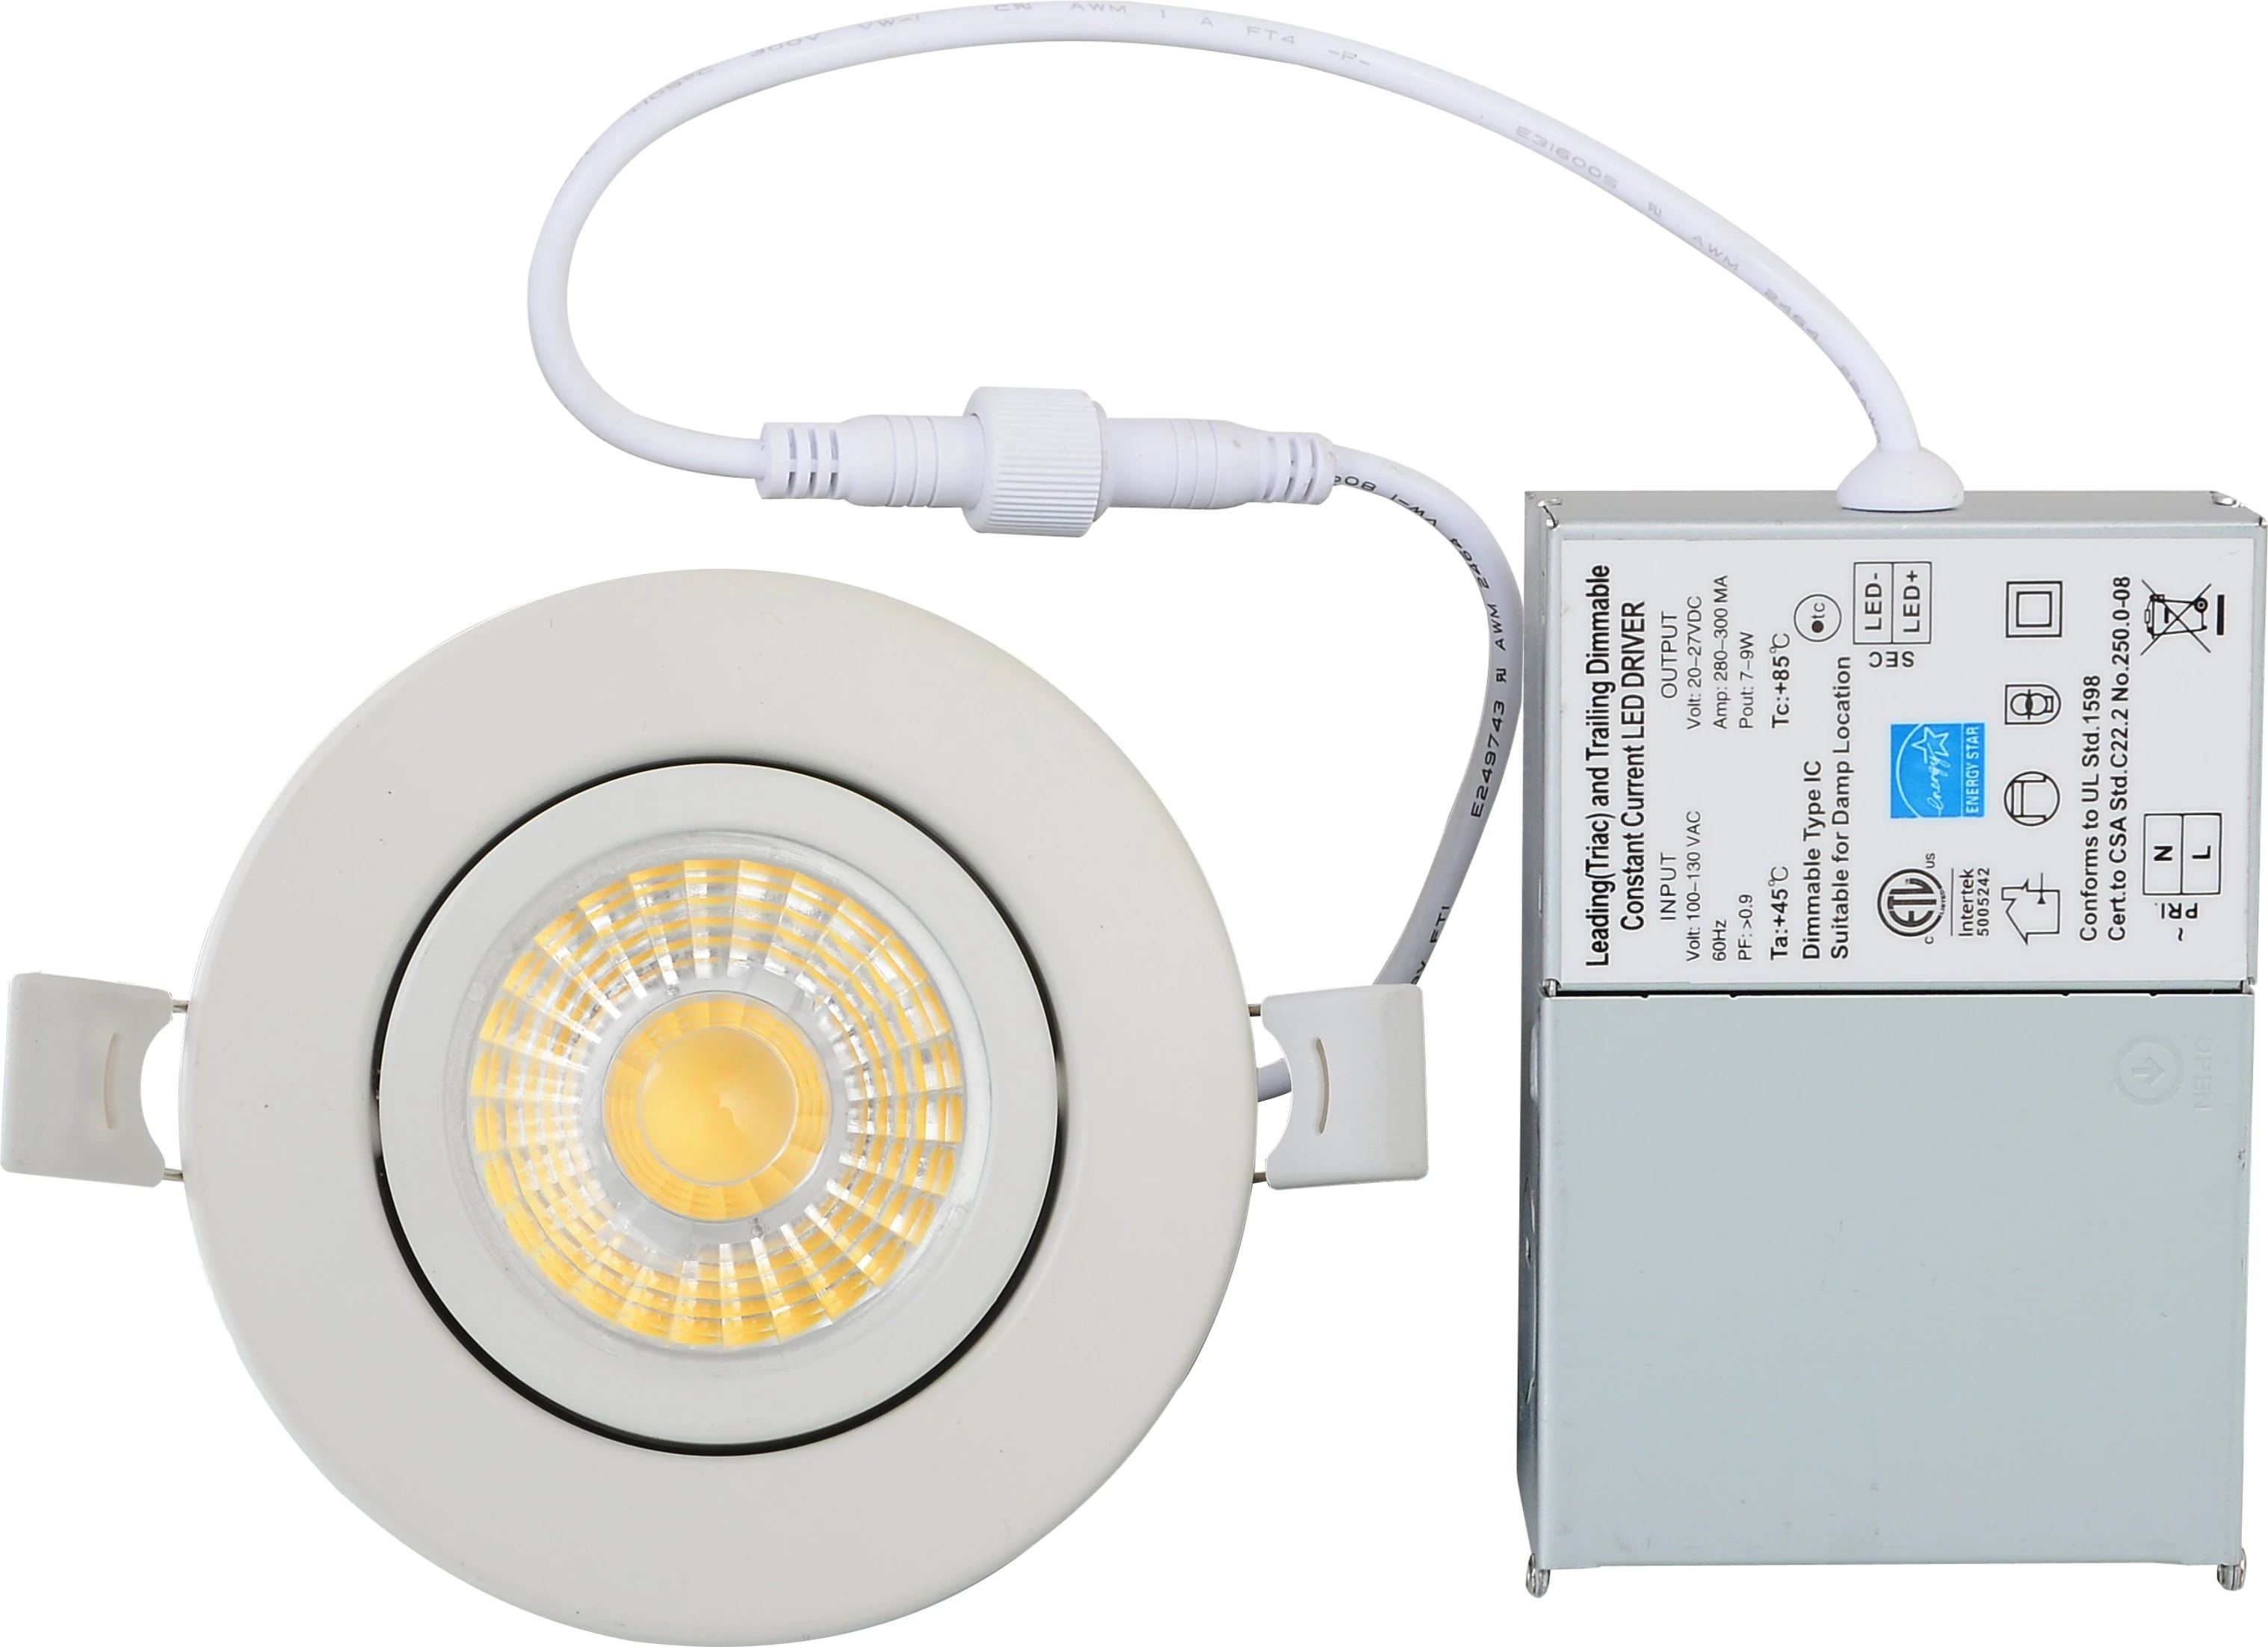 3inch 7W COB LED down light flicker free IC type recessed ceiling light ETL ES approved